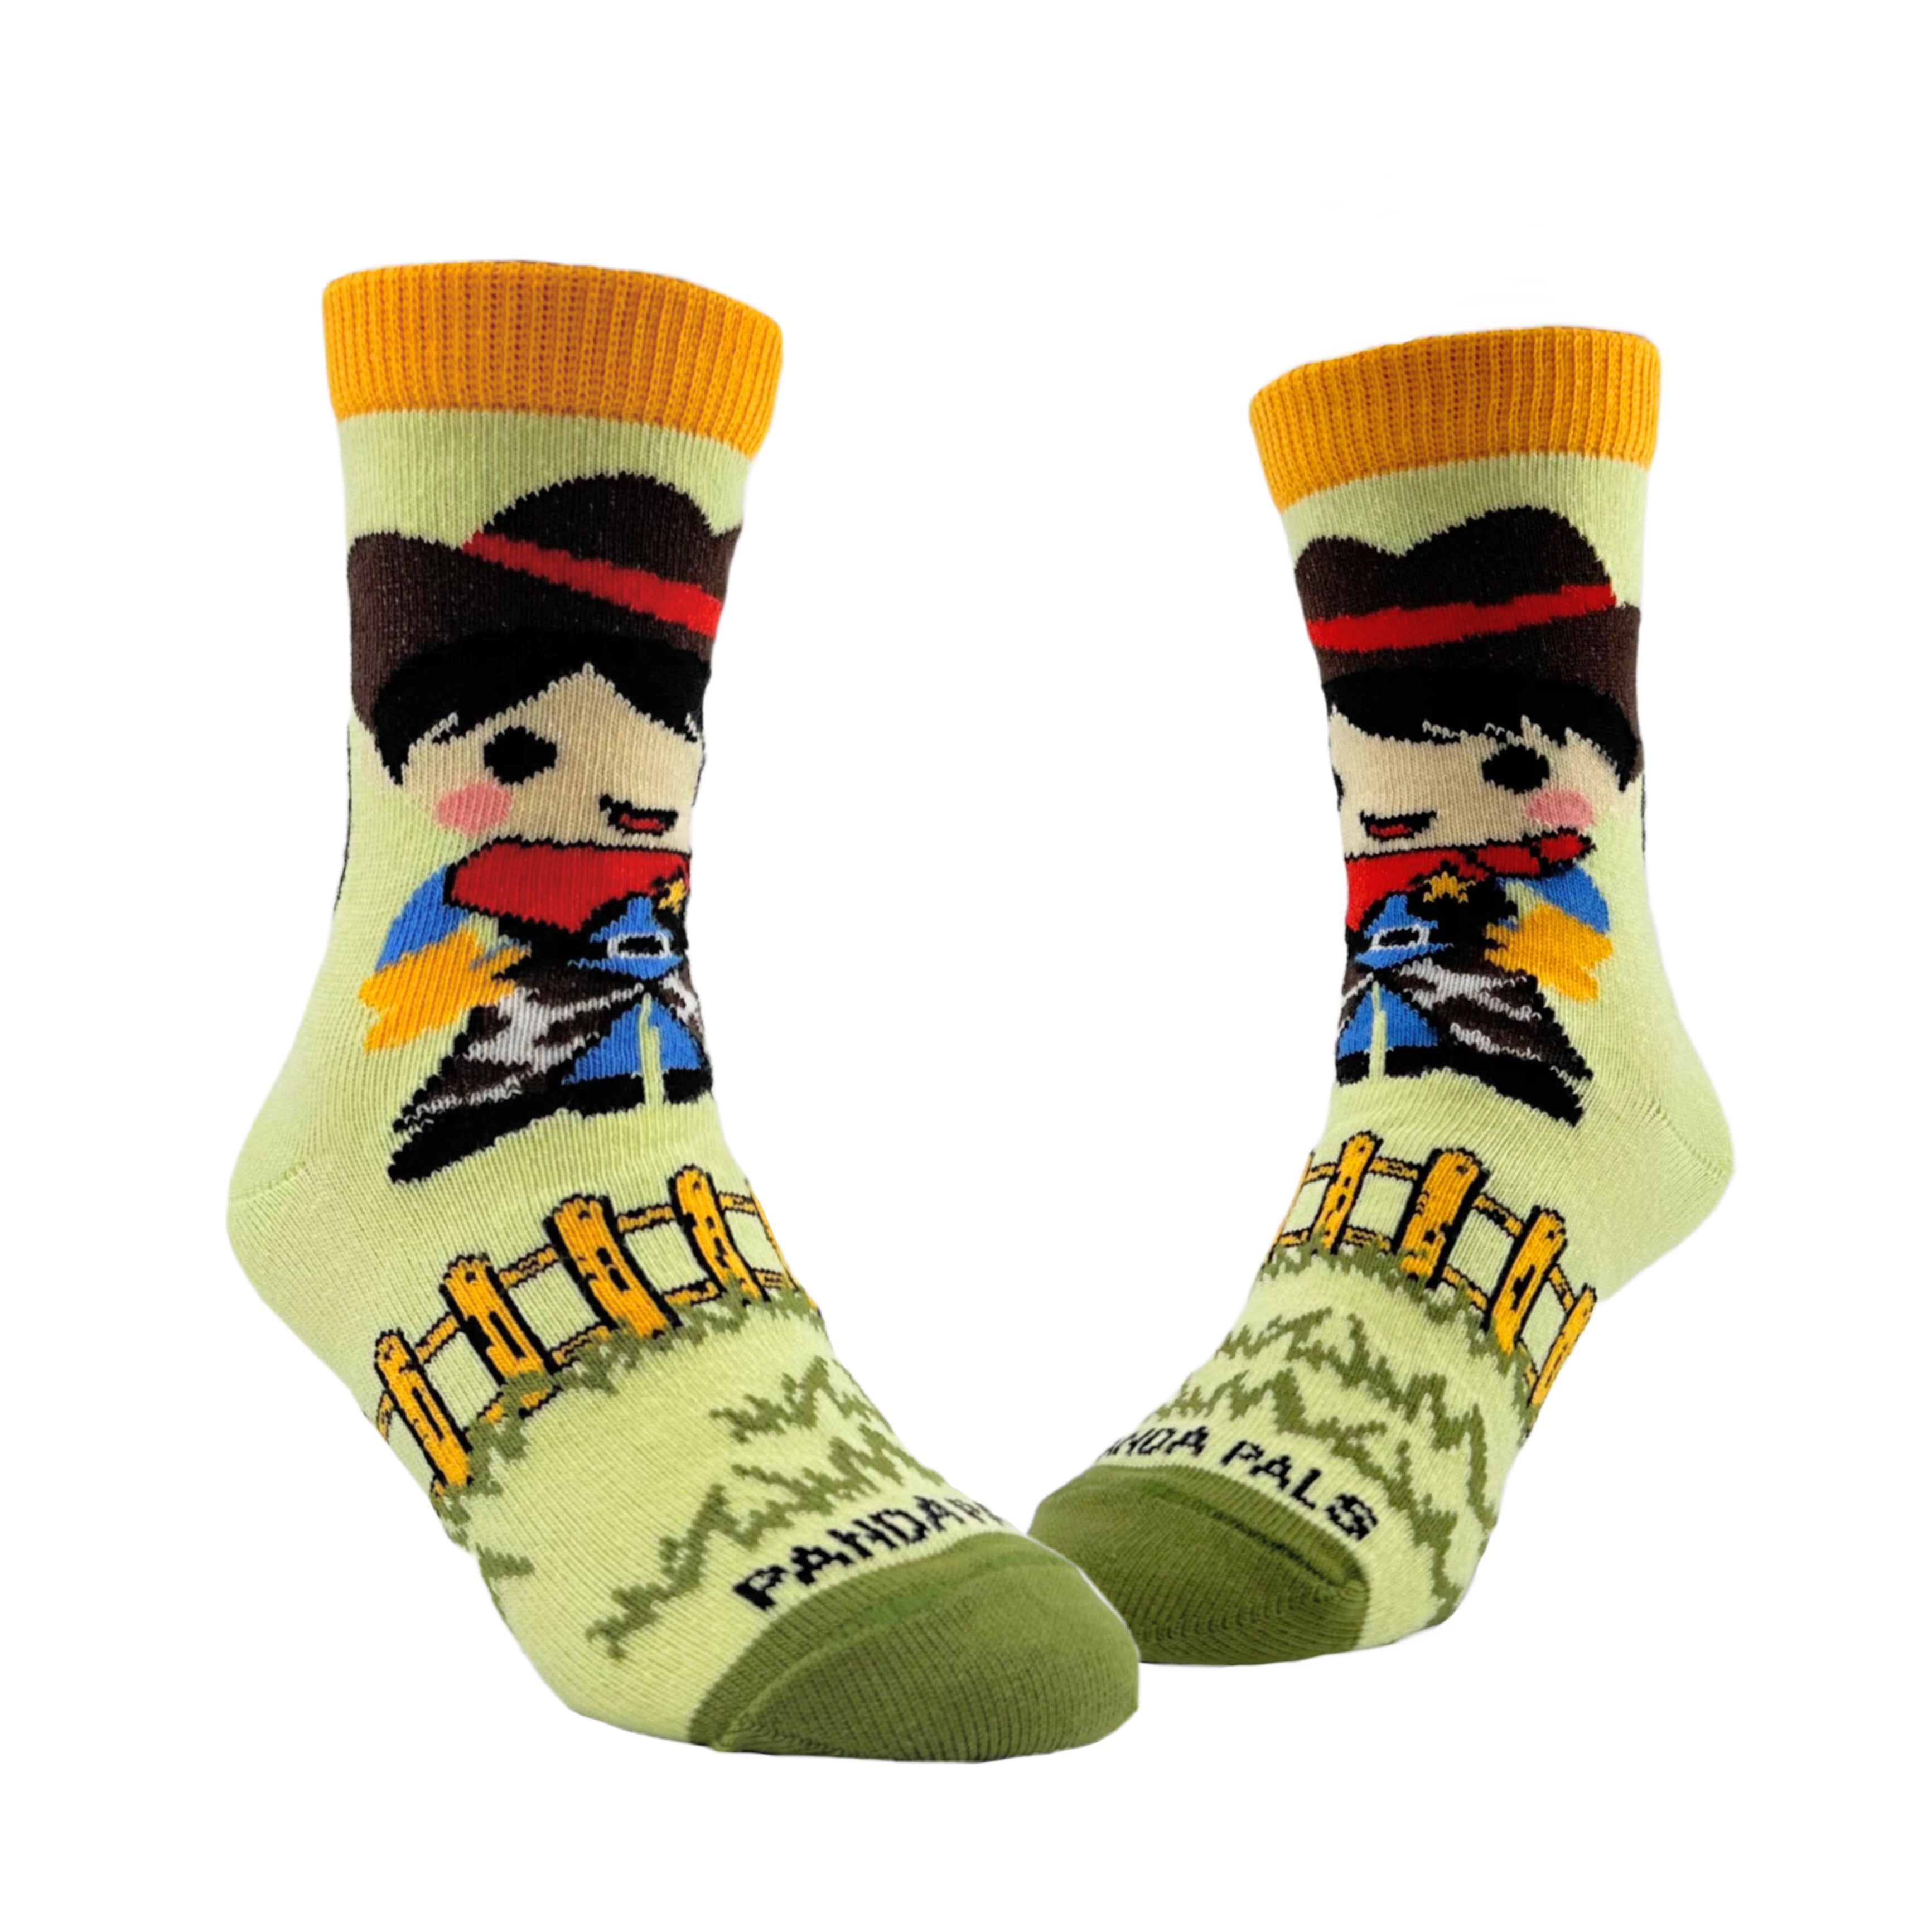 Cowboy / Cowgirl Socks from the Sock Panda (Ages 3-7)